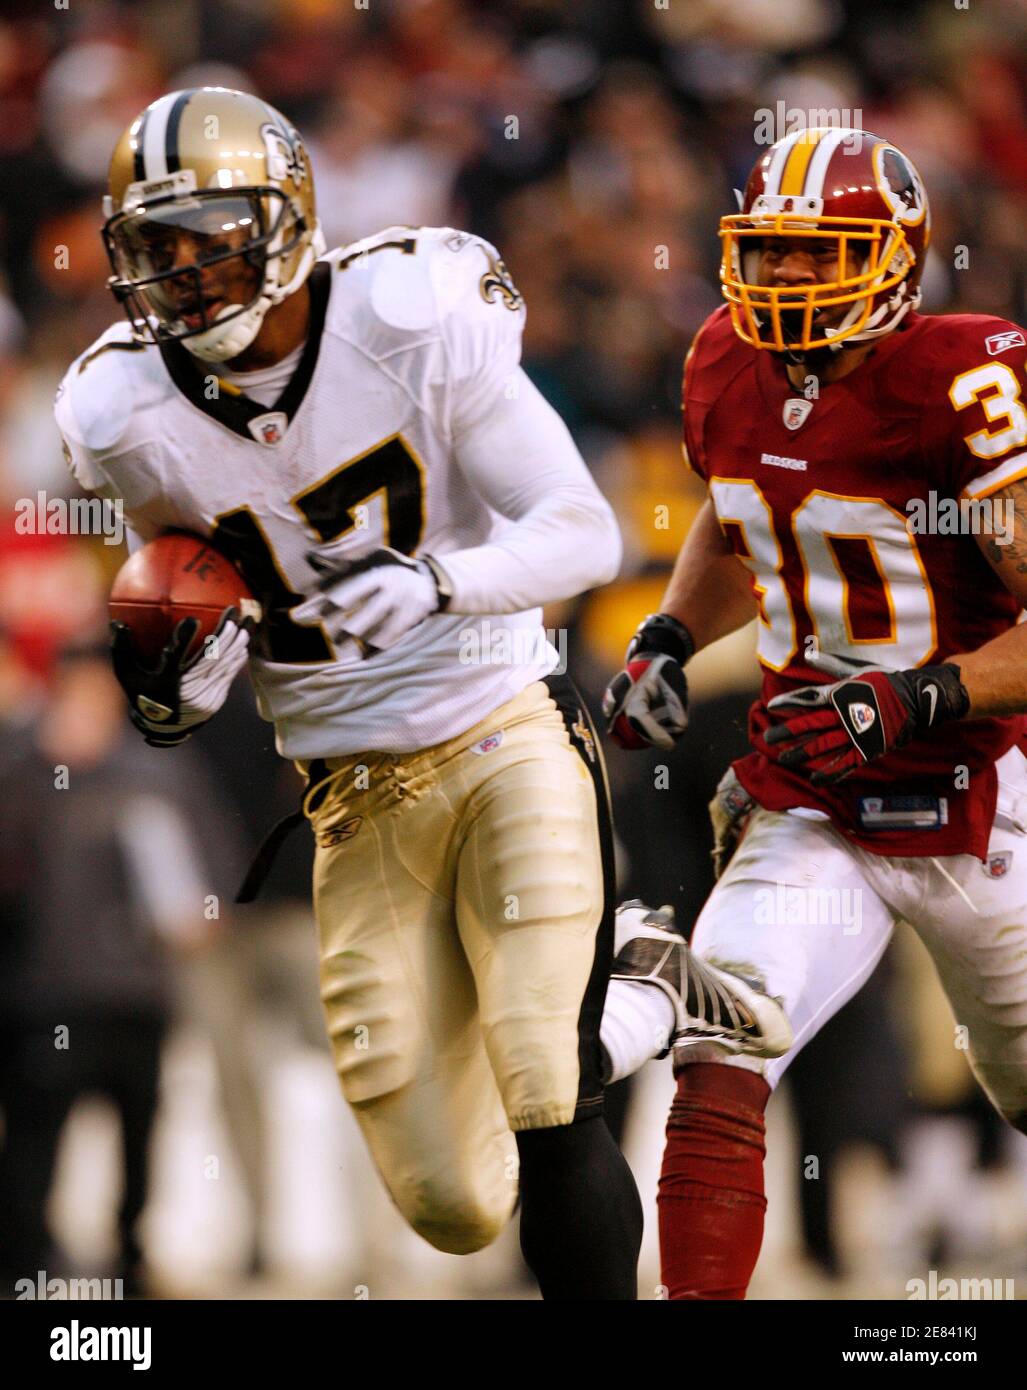 New Orleans Saints receiver Robert Meachem (L) catches a touchdown pass that tied the game from quarterback Drew Brees (not in photo) in the fourth quarter of their NFL football game against the Washington Redskins in Landover, Maryland December 6, 2009. Redskins' safety LaRon Landry (R) pursues on the play. The Saints' won the game in overtime on a field goal.    REUTERS/Gary Cameron               (UNITED STATES SPORT FOOTBALL) Stock Photo